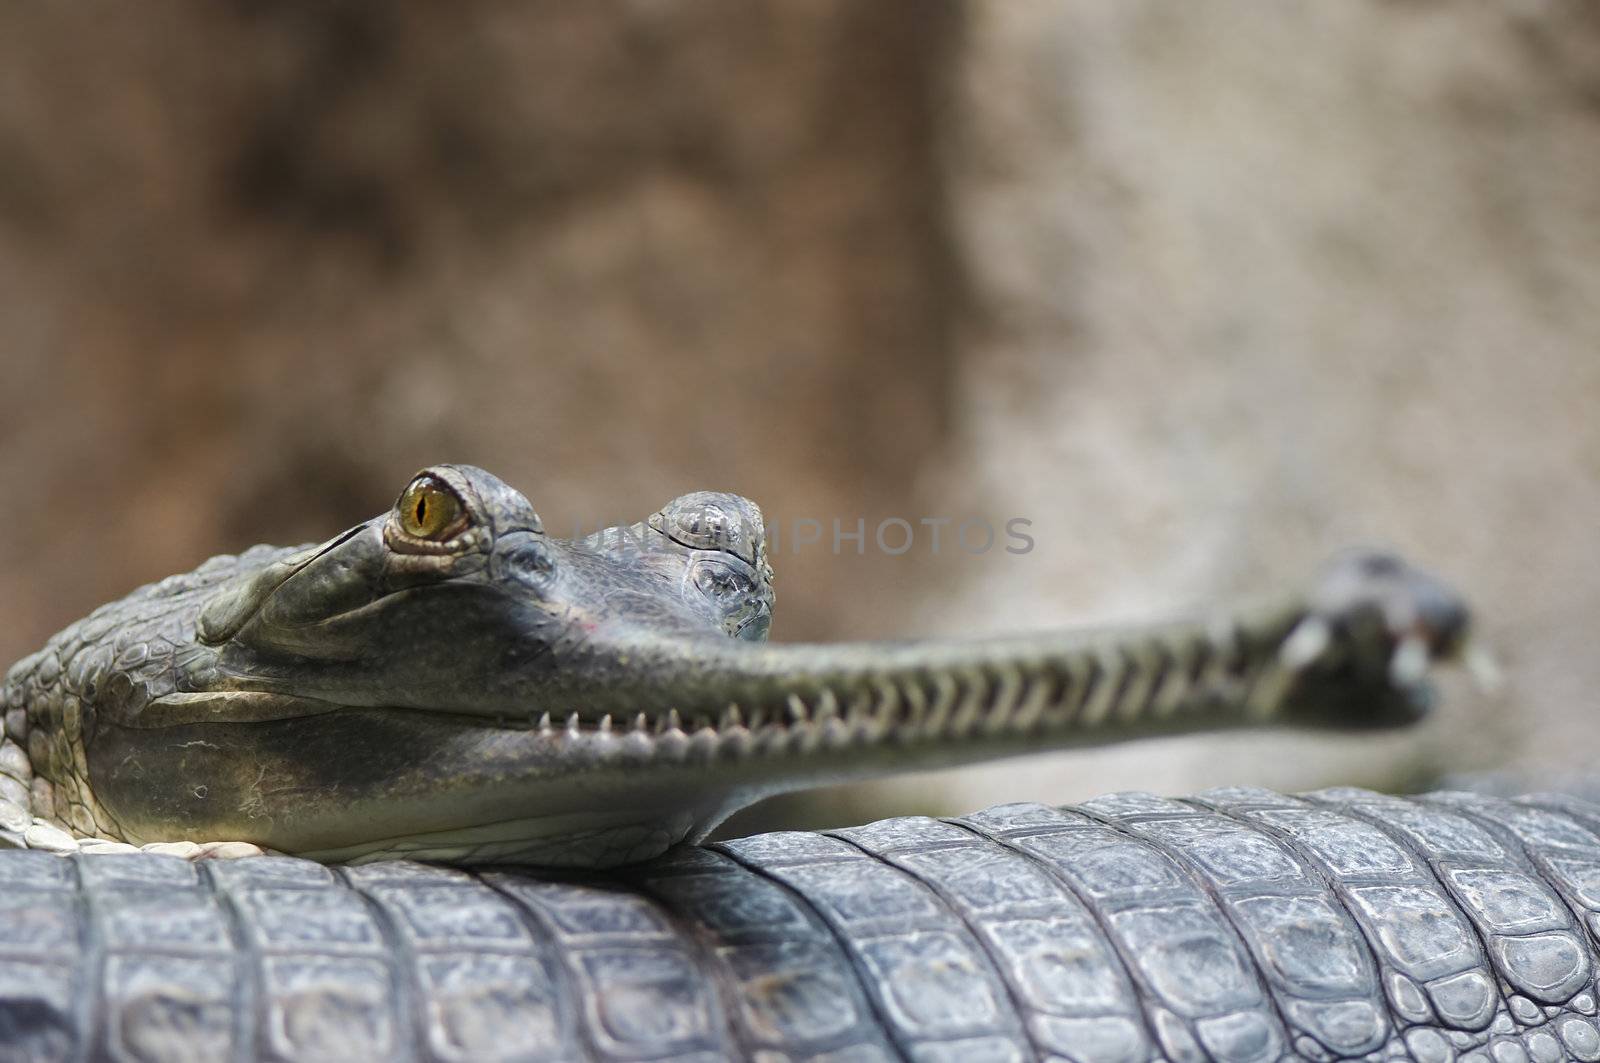 Detail of the head of Indial gavial - endangered species